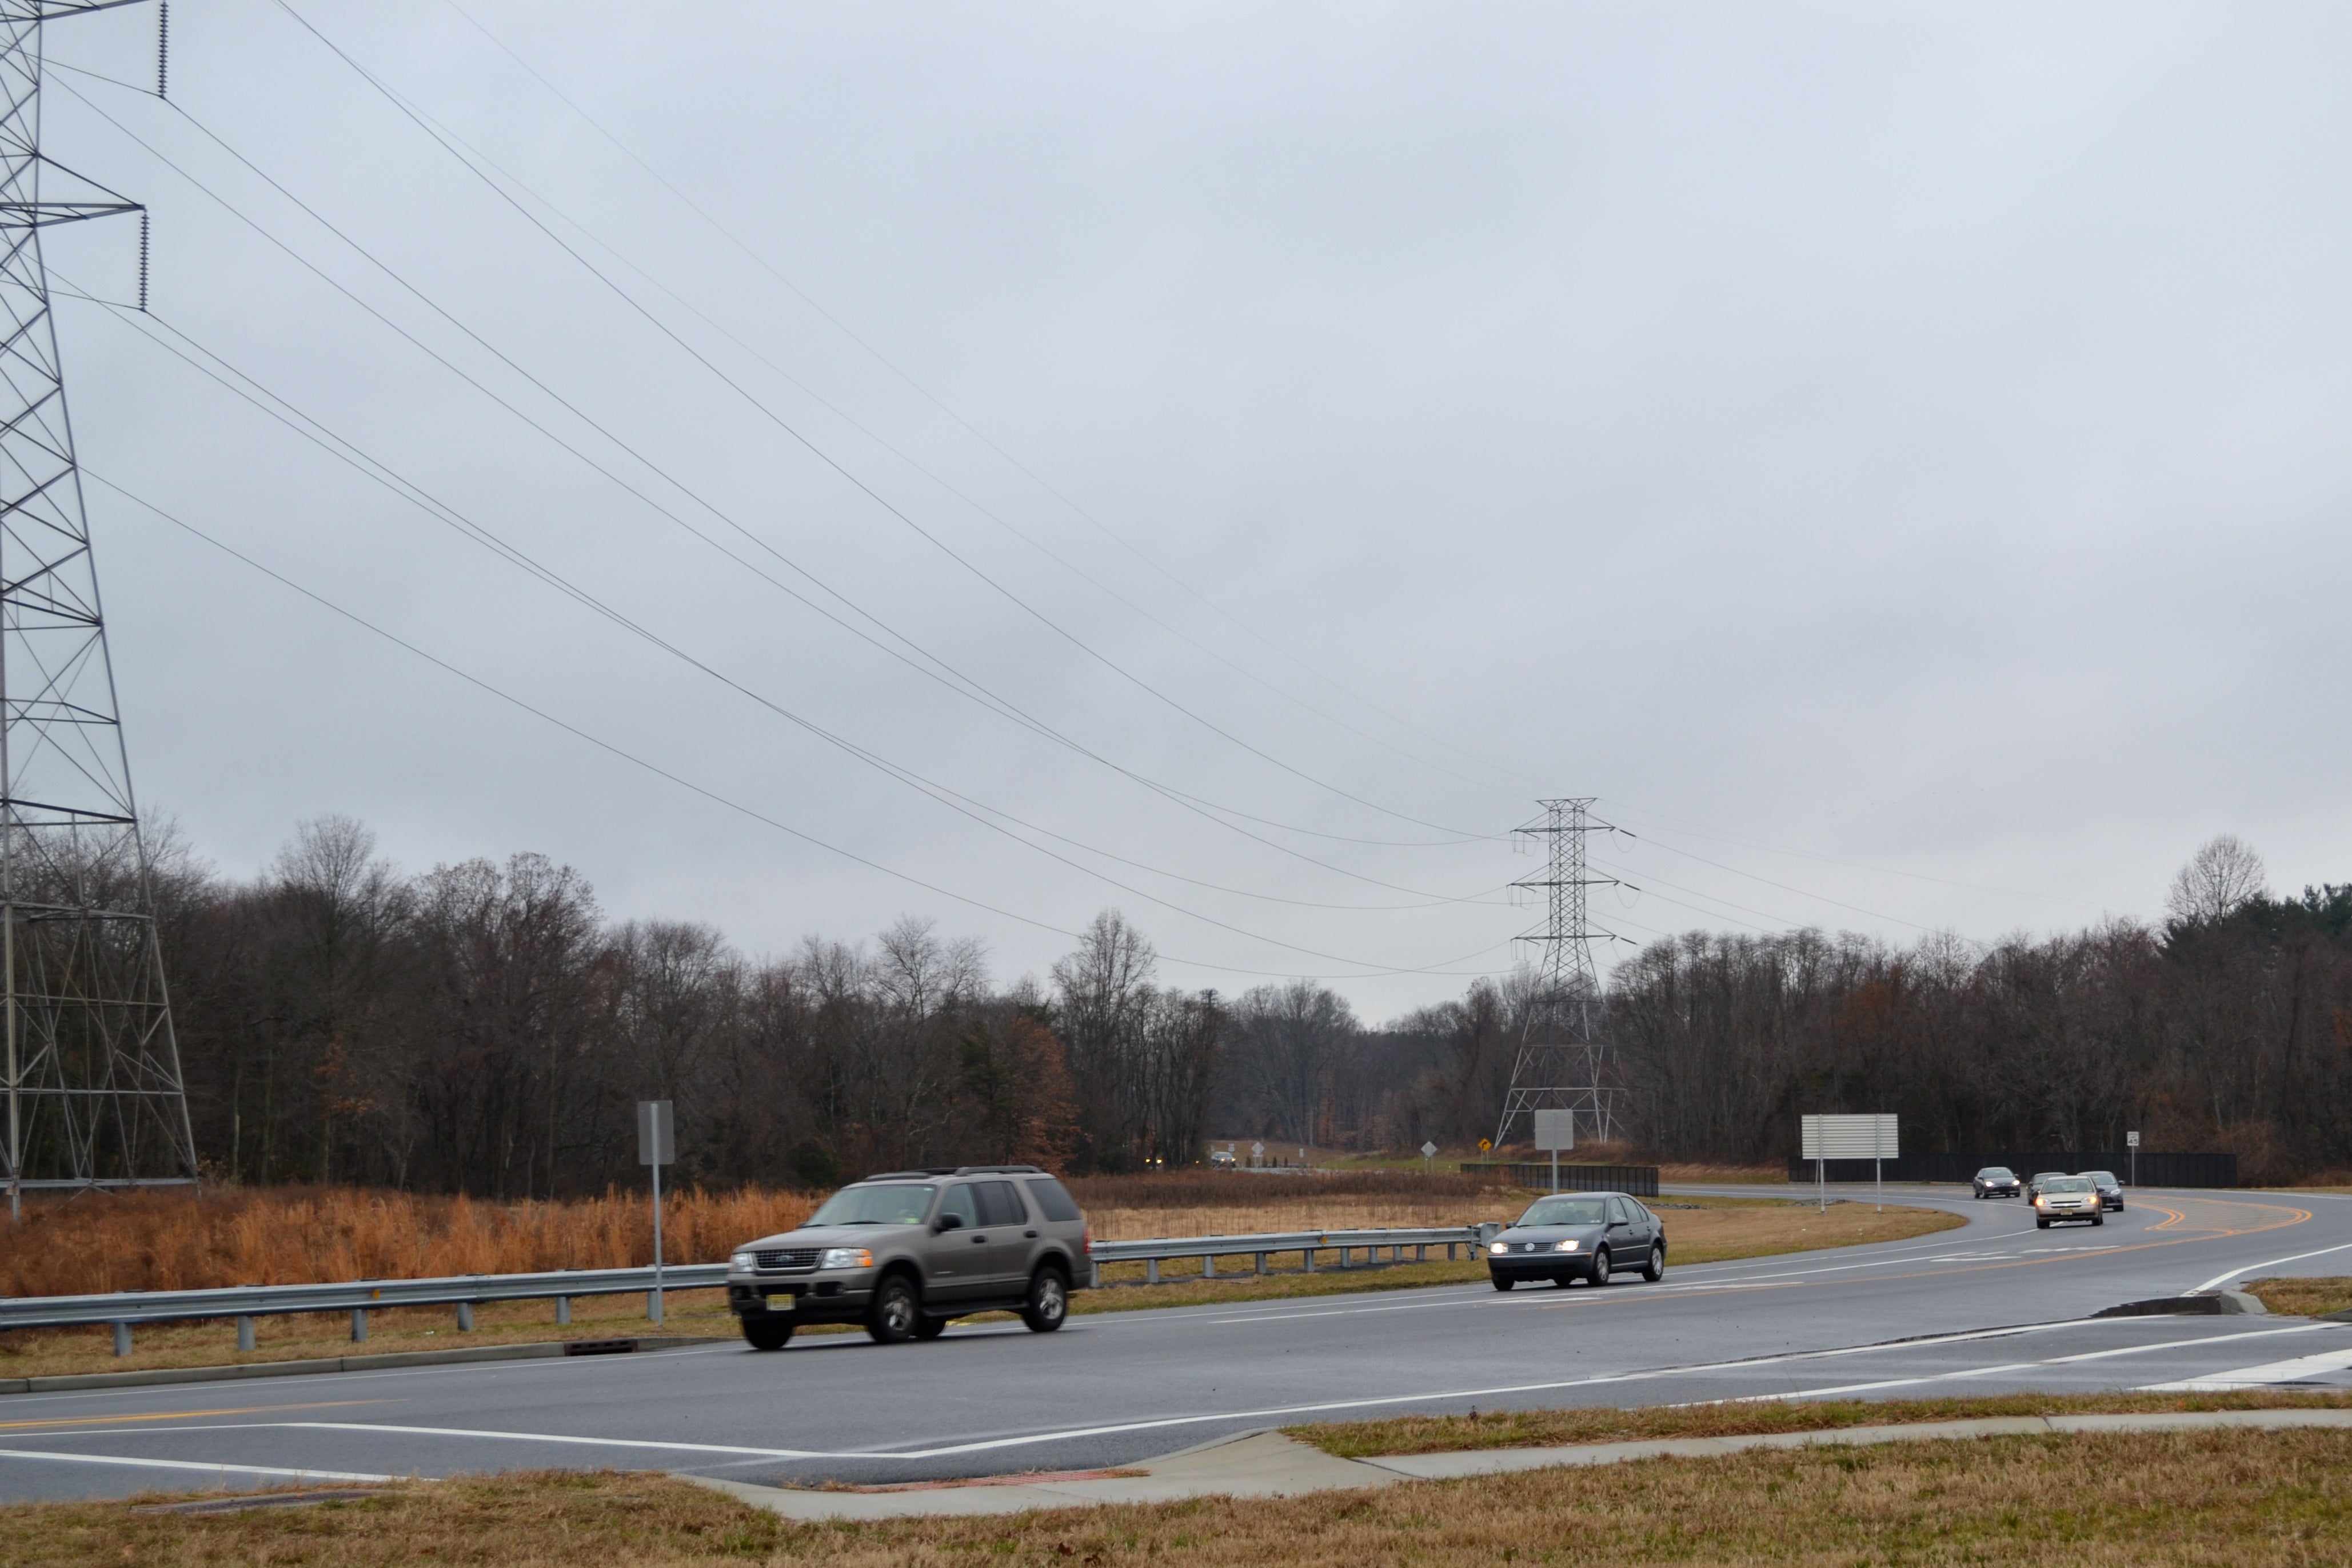 The $16 million, 1.5-mile bypass sees approximately 23,000 cars per day during peak times